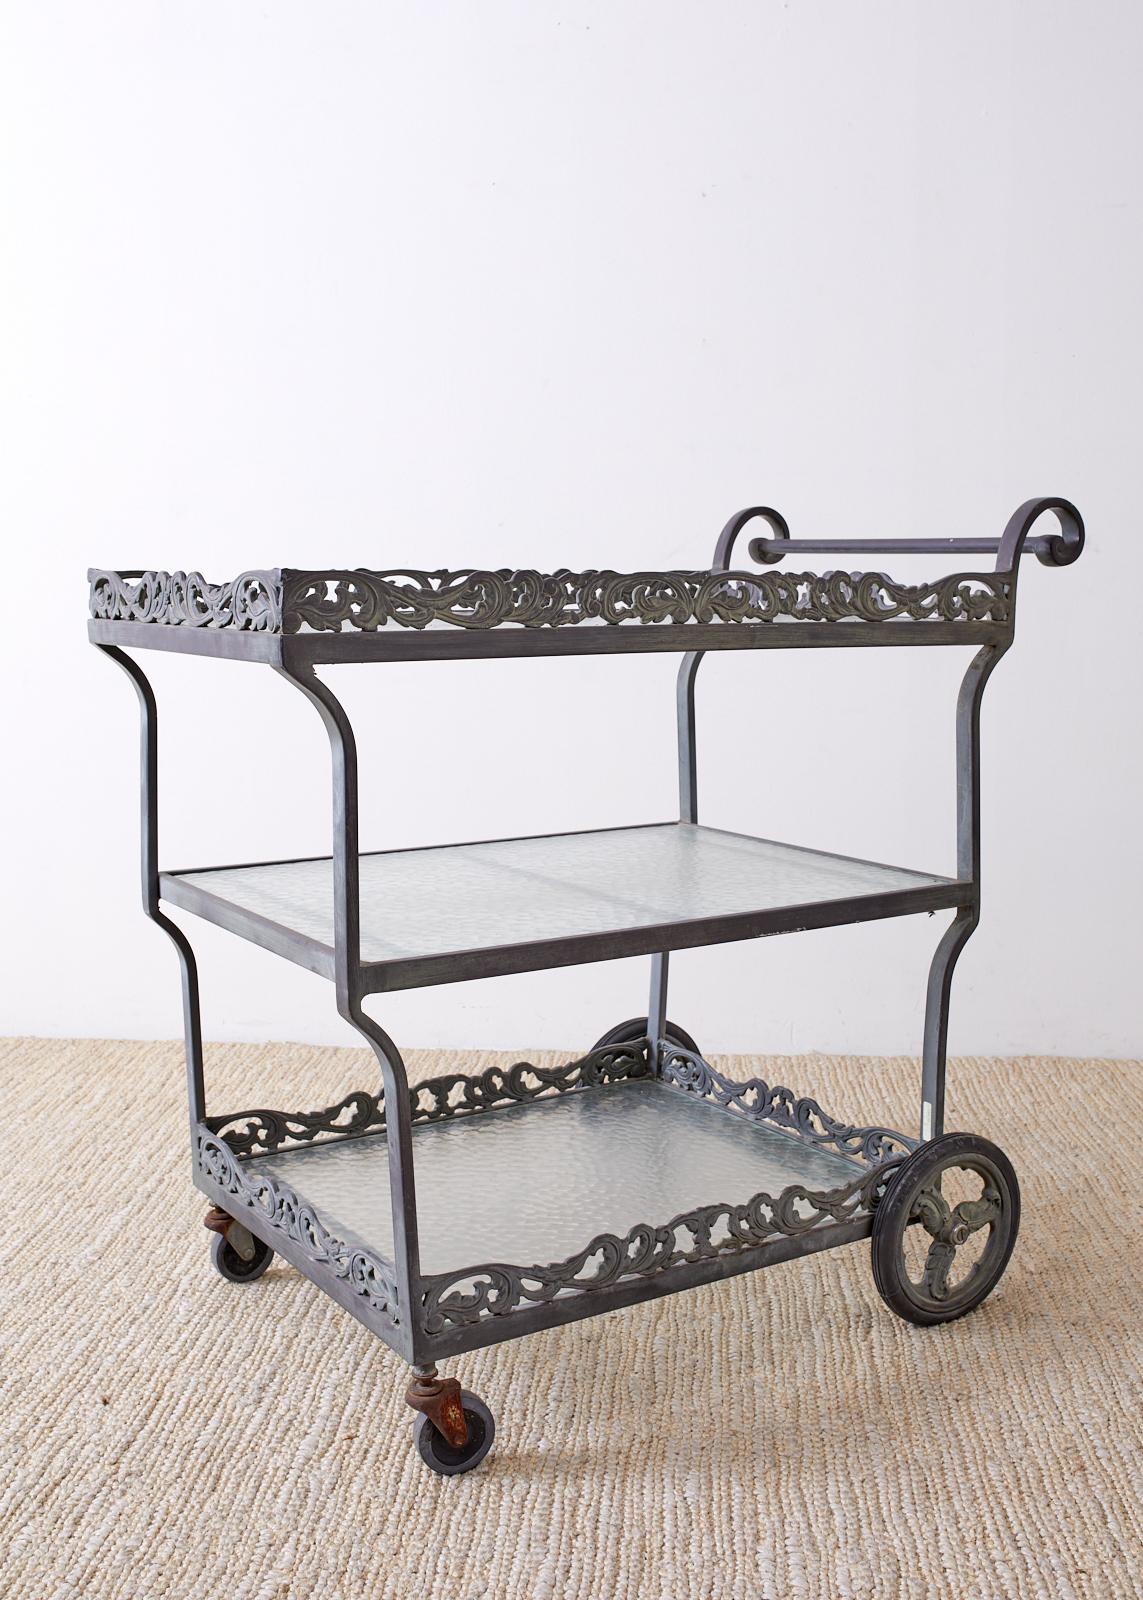 Three tier aluminum bar cart or cocktail trolley made by Brown Jordan. Features a neoclassical acanthus design motif on two of the galleried tiers. The cart has a beautiful verdigris metal patina and each tier has a textured glass inset. From an